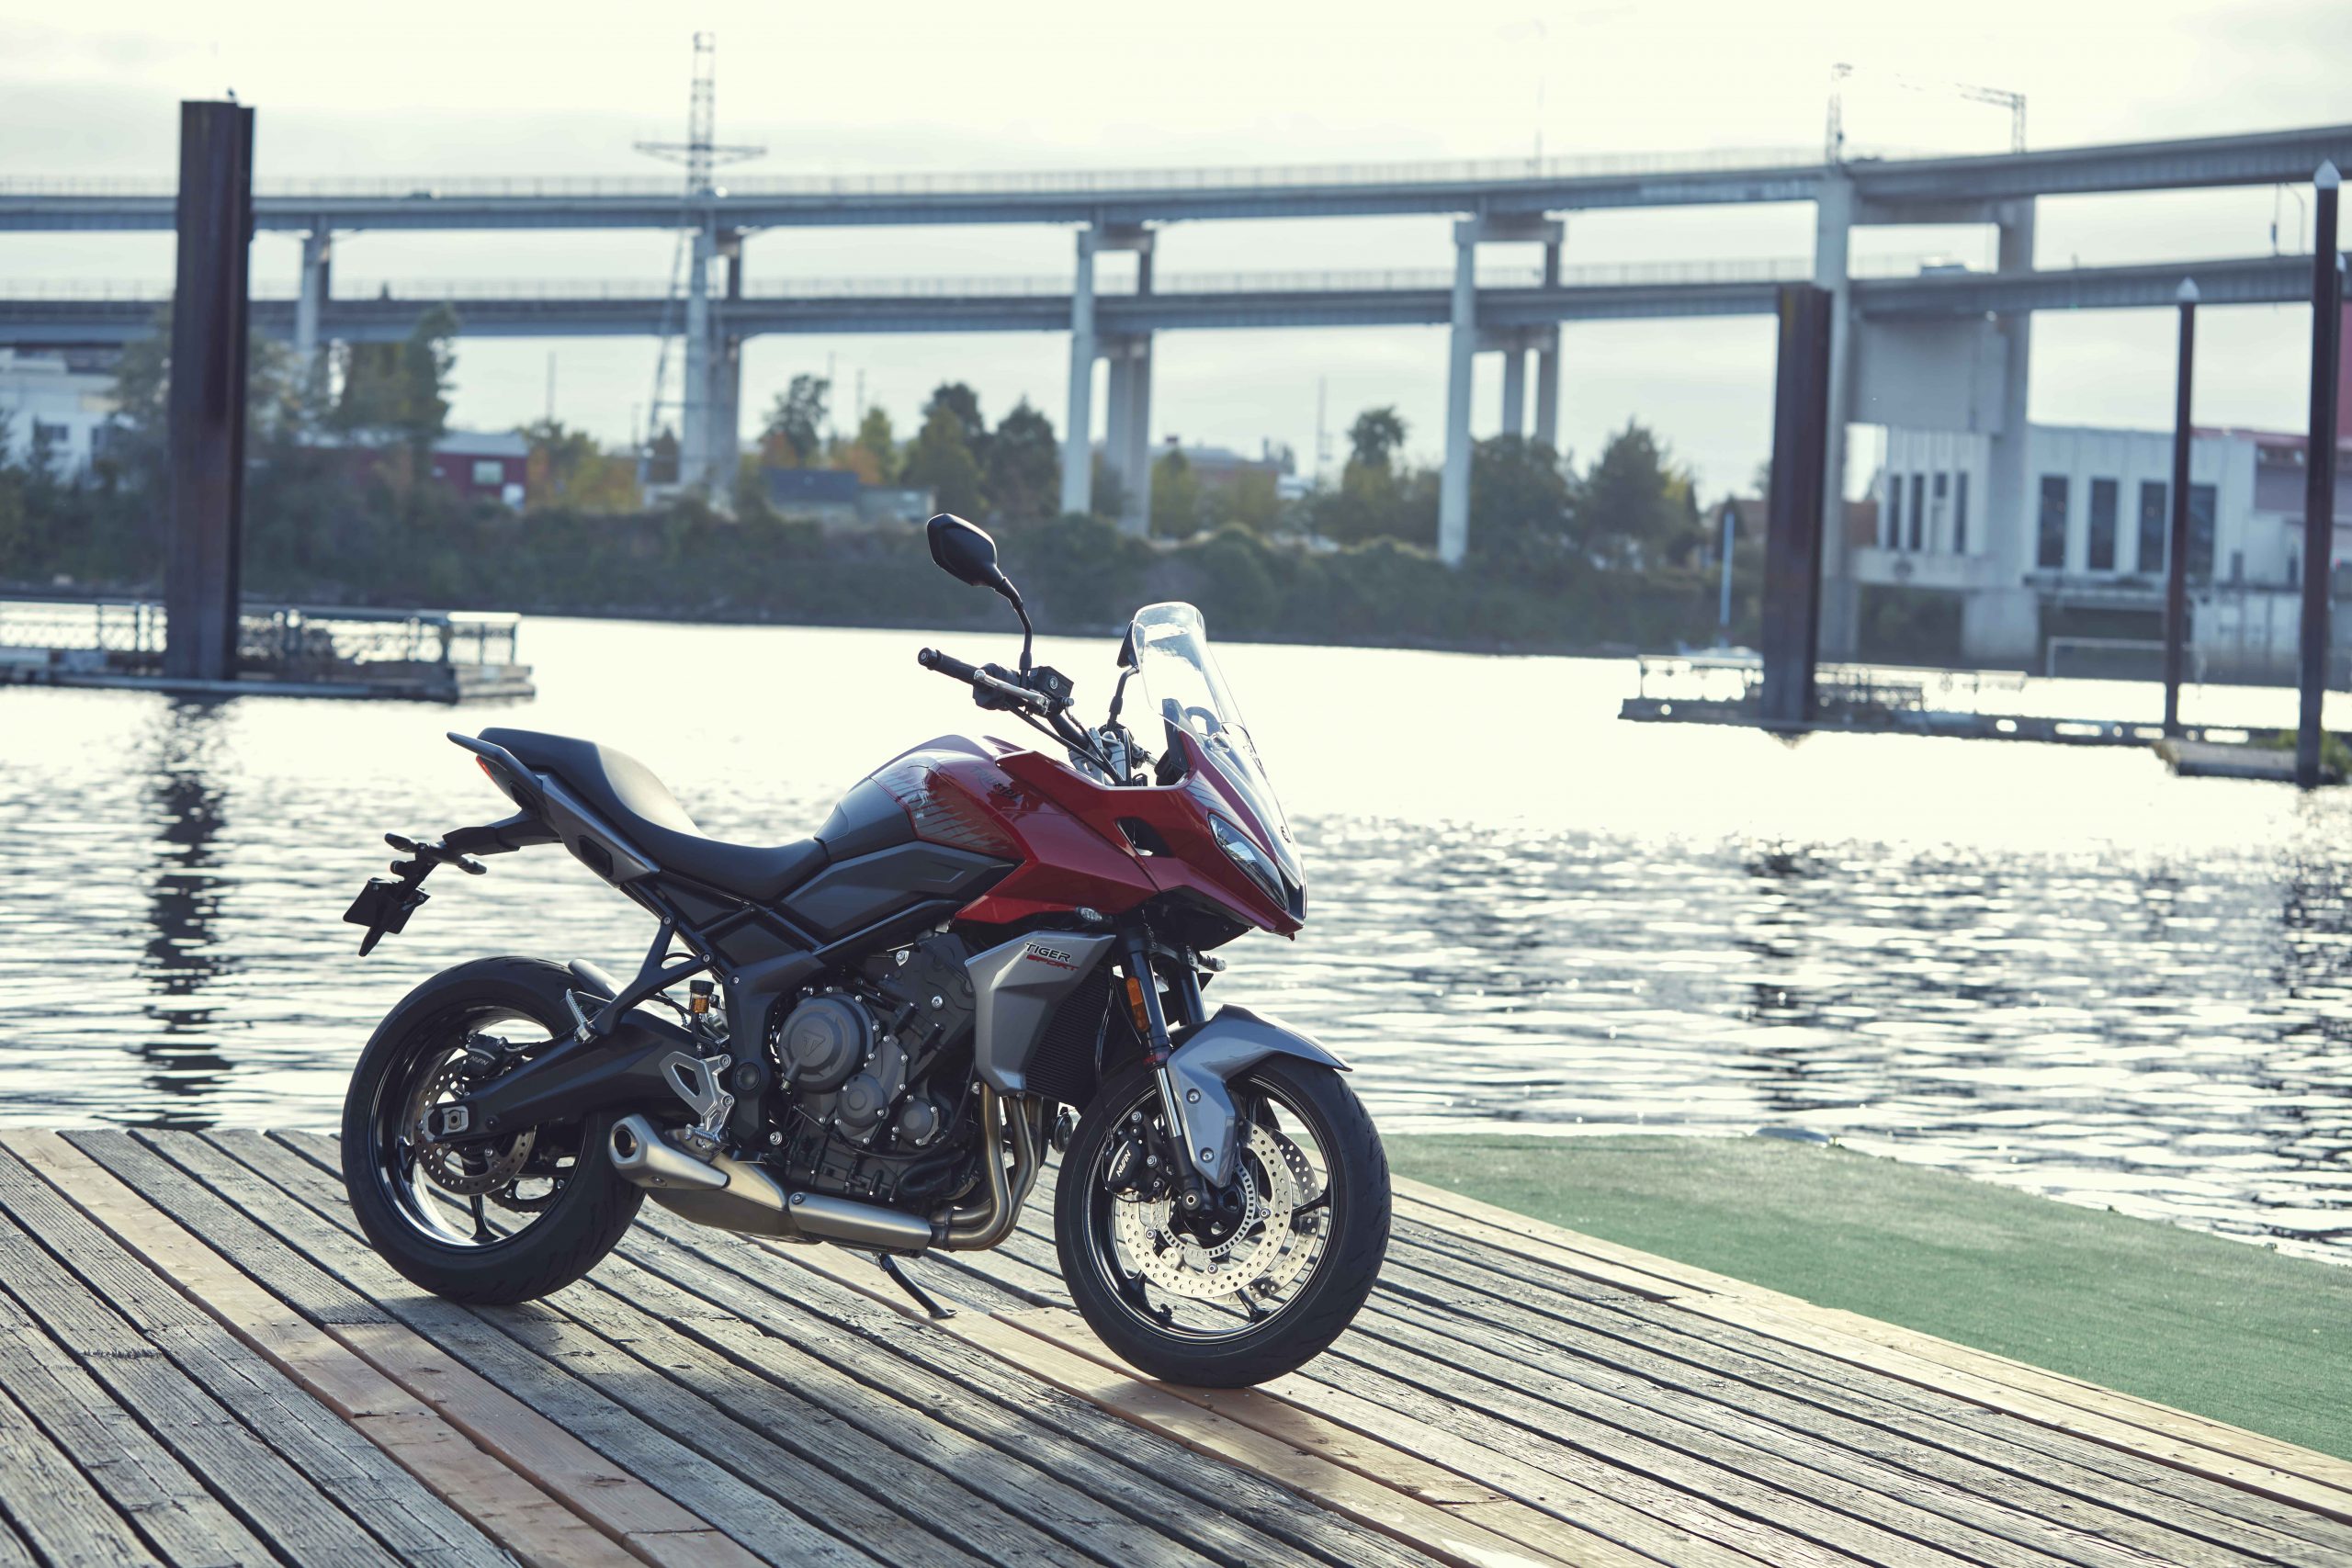 A static shot of the new Triumph Tiger Sport 660 by the docks